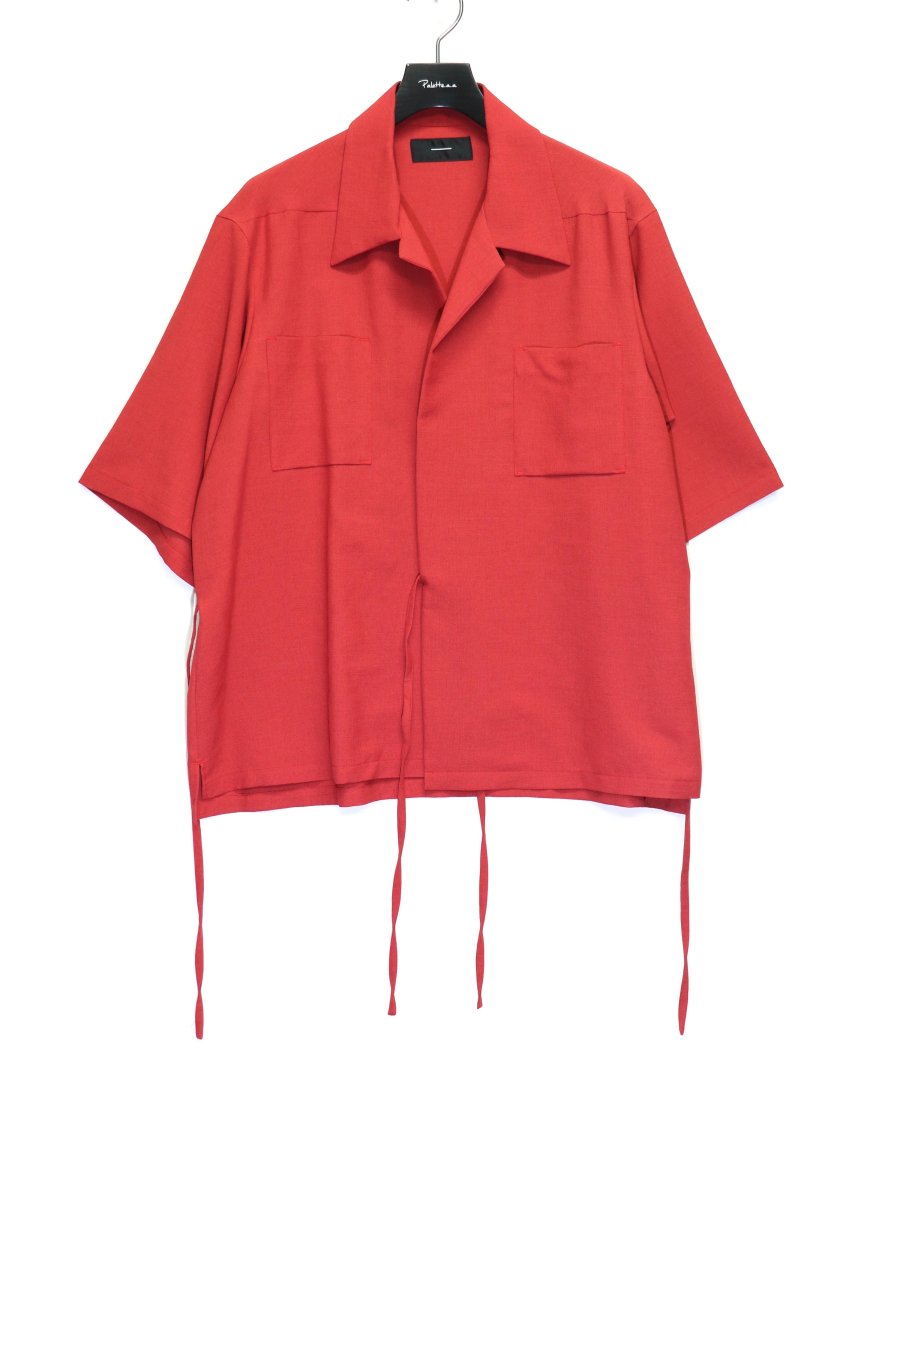 ［ー］Minus   HALF SLEEVE  THINKING SHIRT(RED)<img class='new_mark_img2' src='https://img.shop-pro.jp/img/new/icons15.gif' style='border:none;display:inline;margin:0px;padding:0px;width:auto;' />